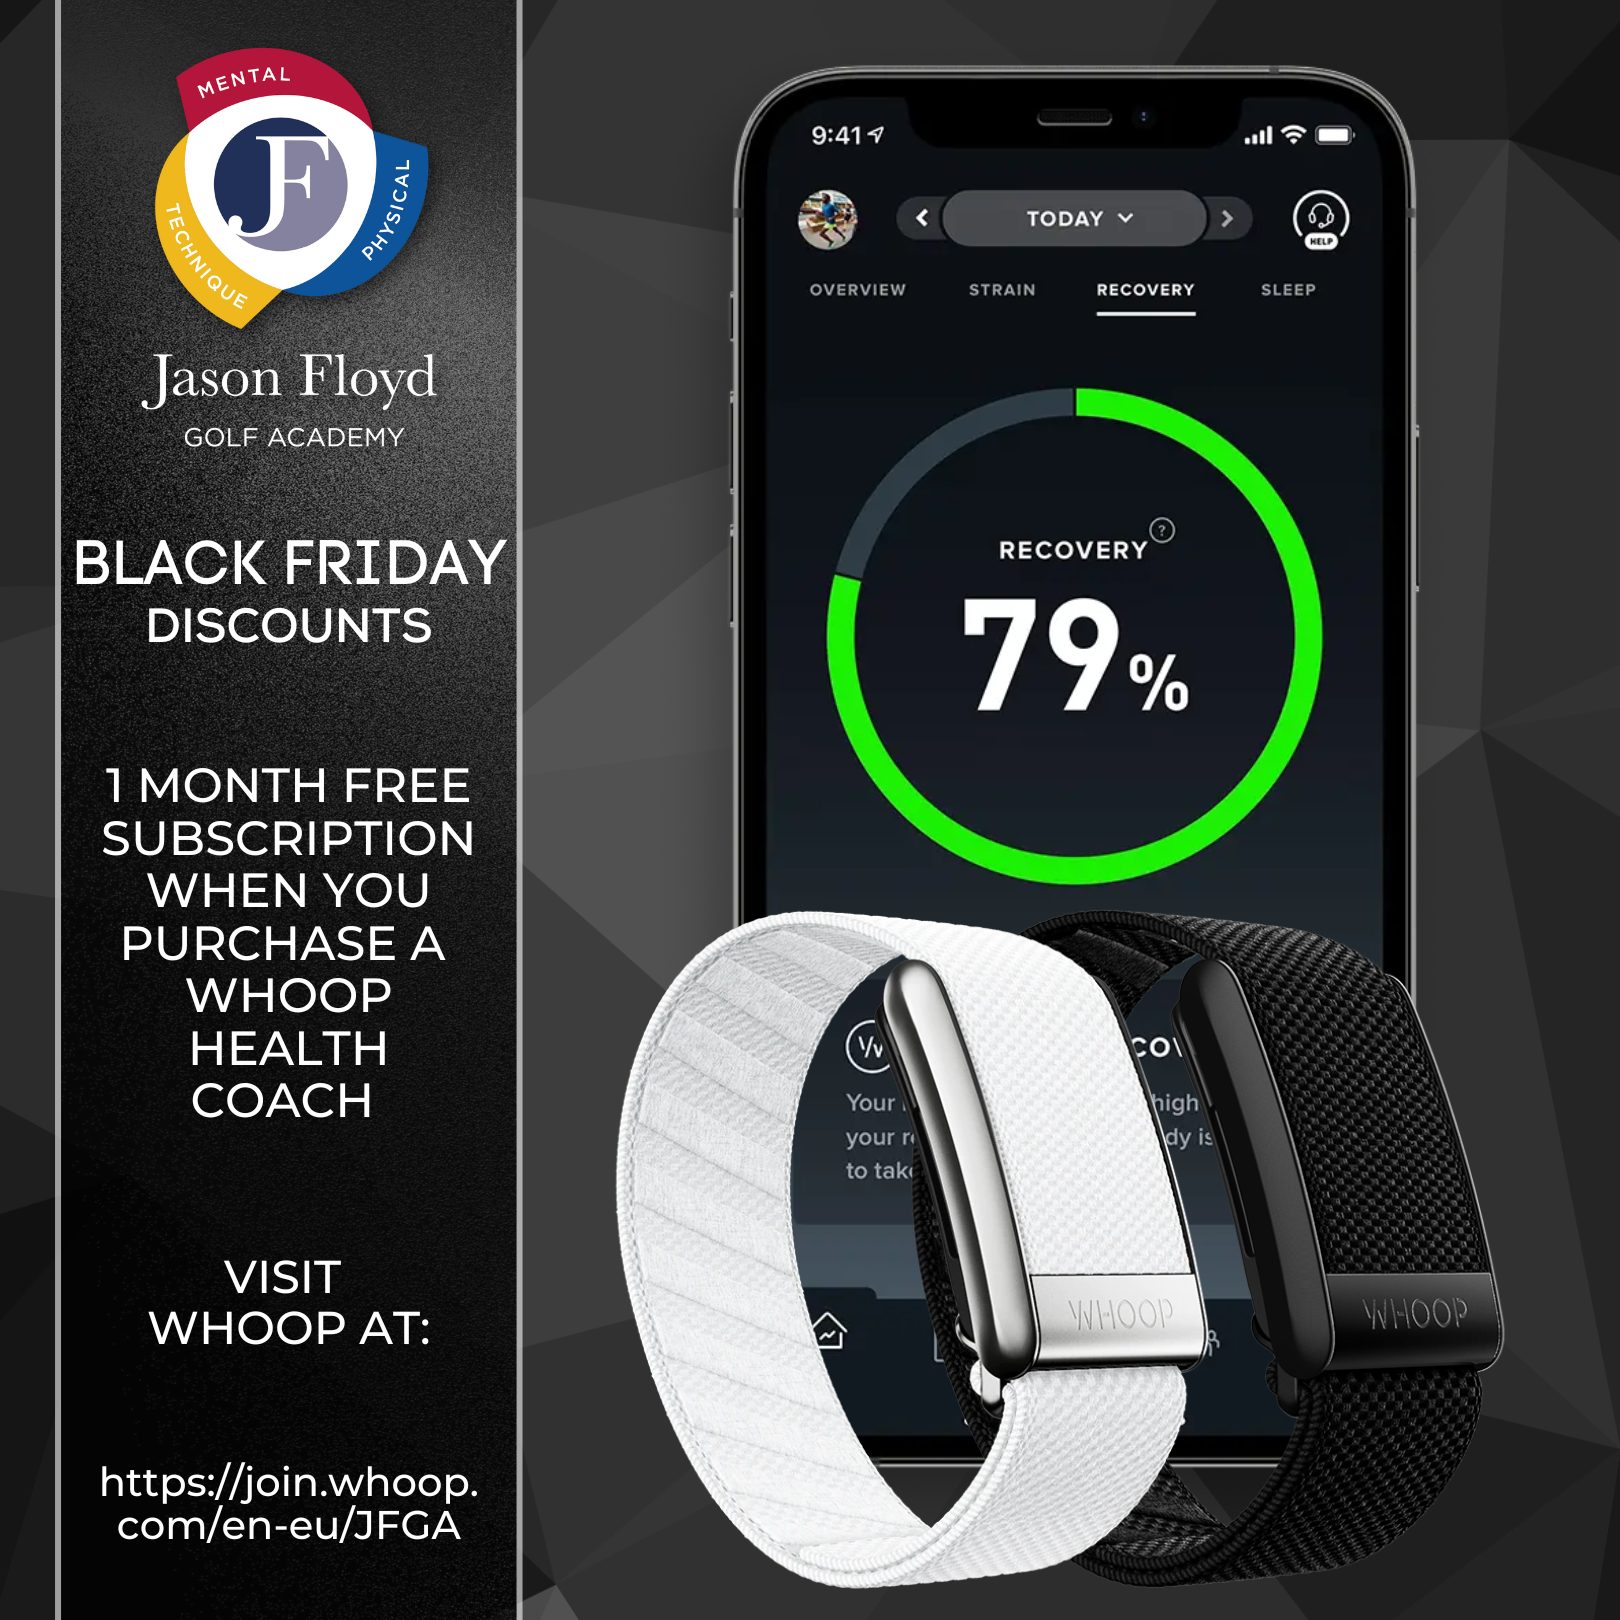 1 Month Free With WHOOP - Jason Floyd Golf Academy